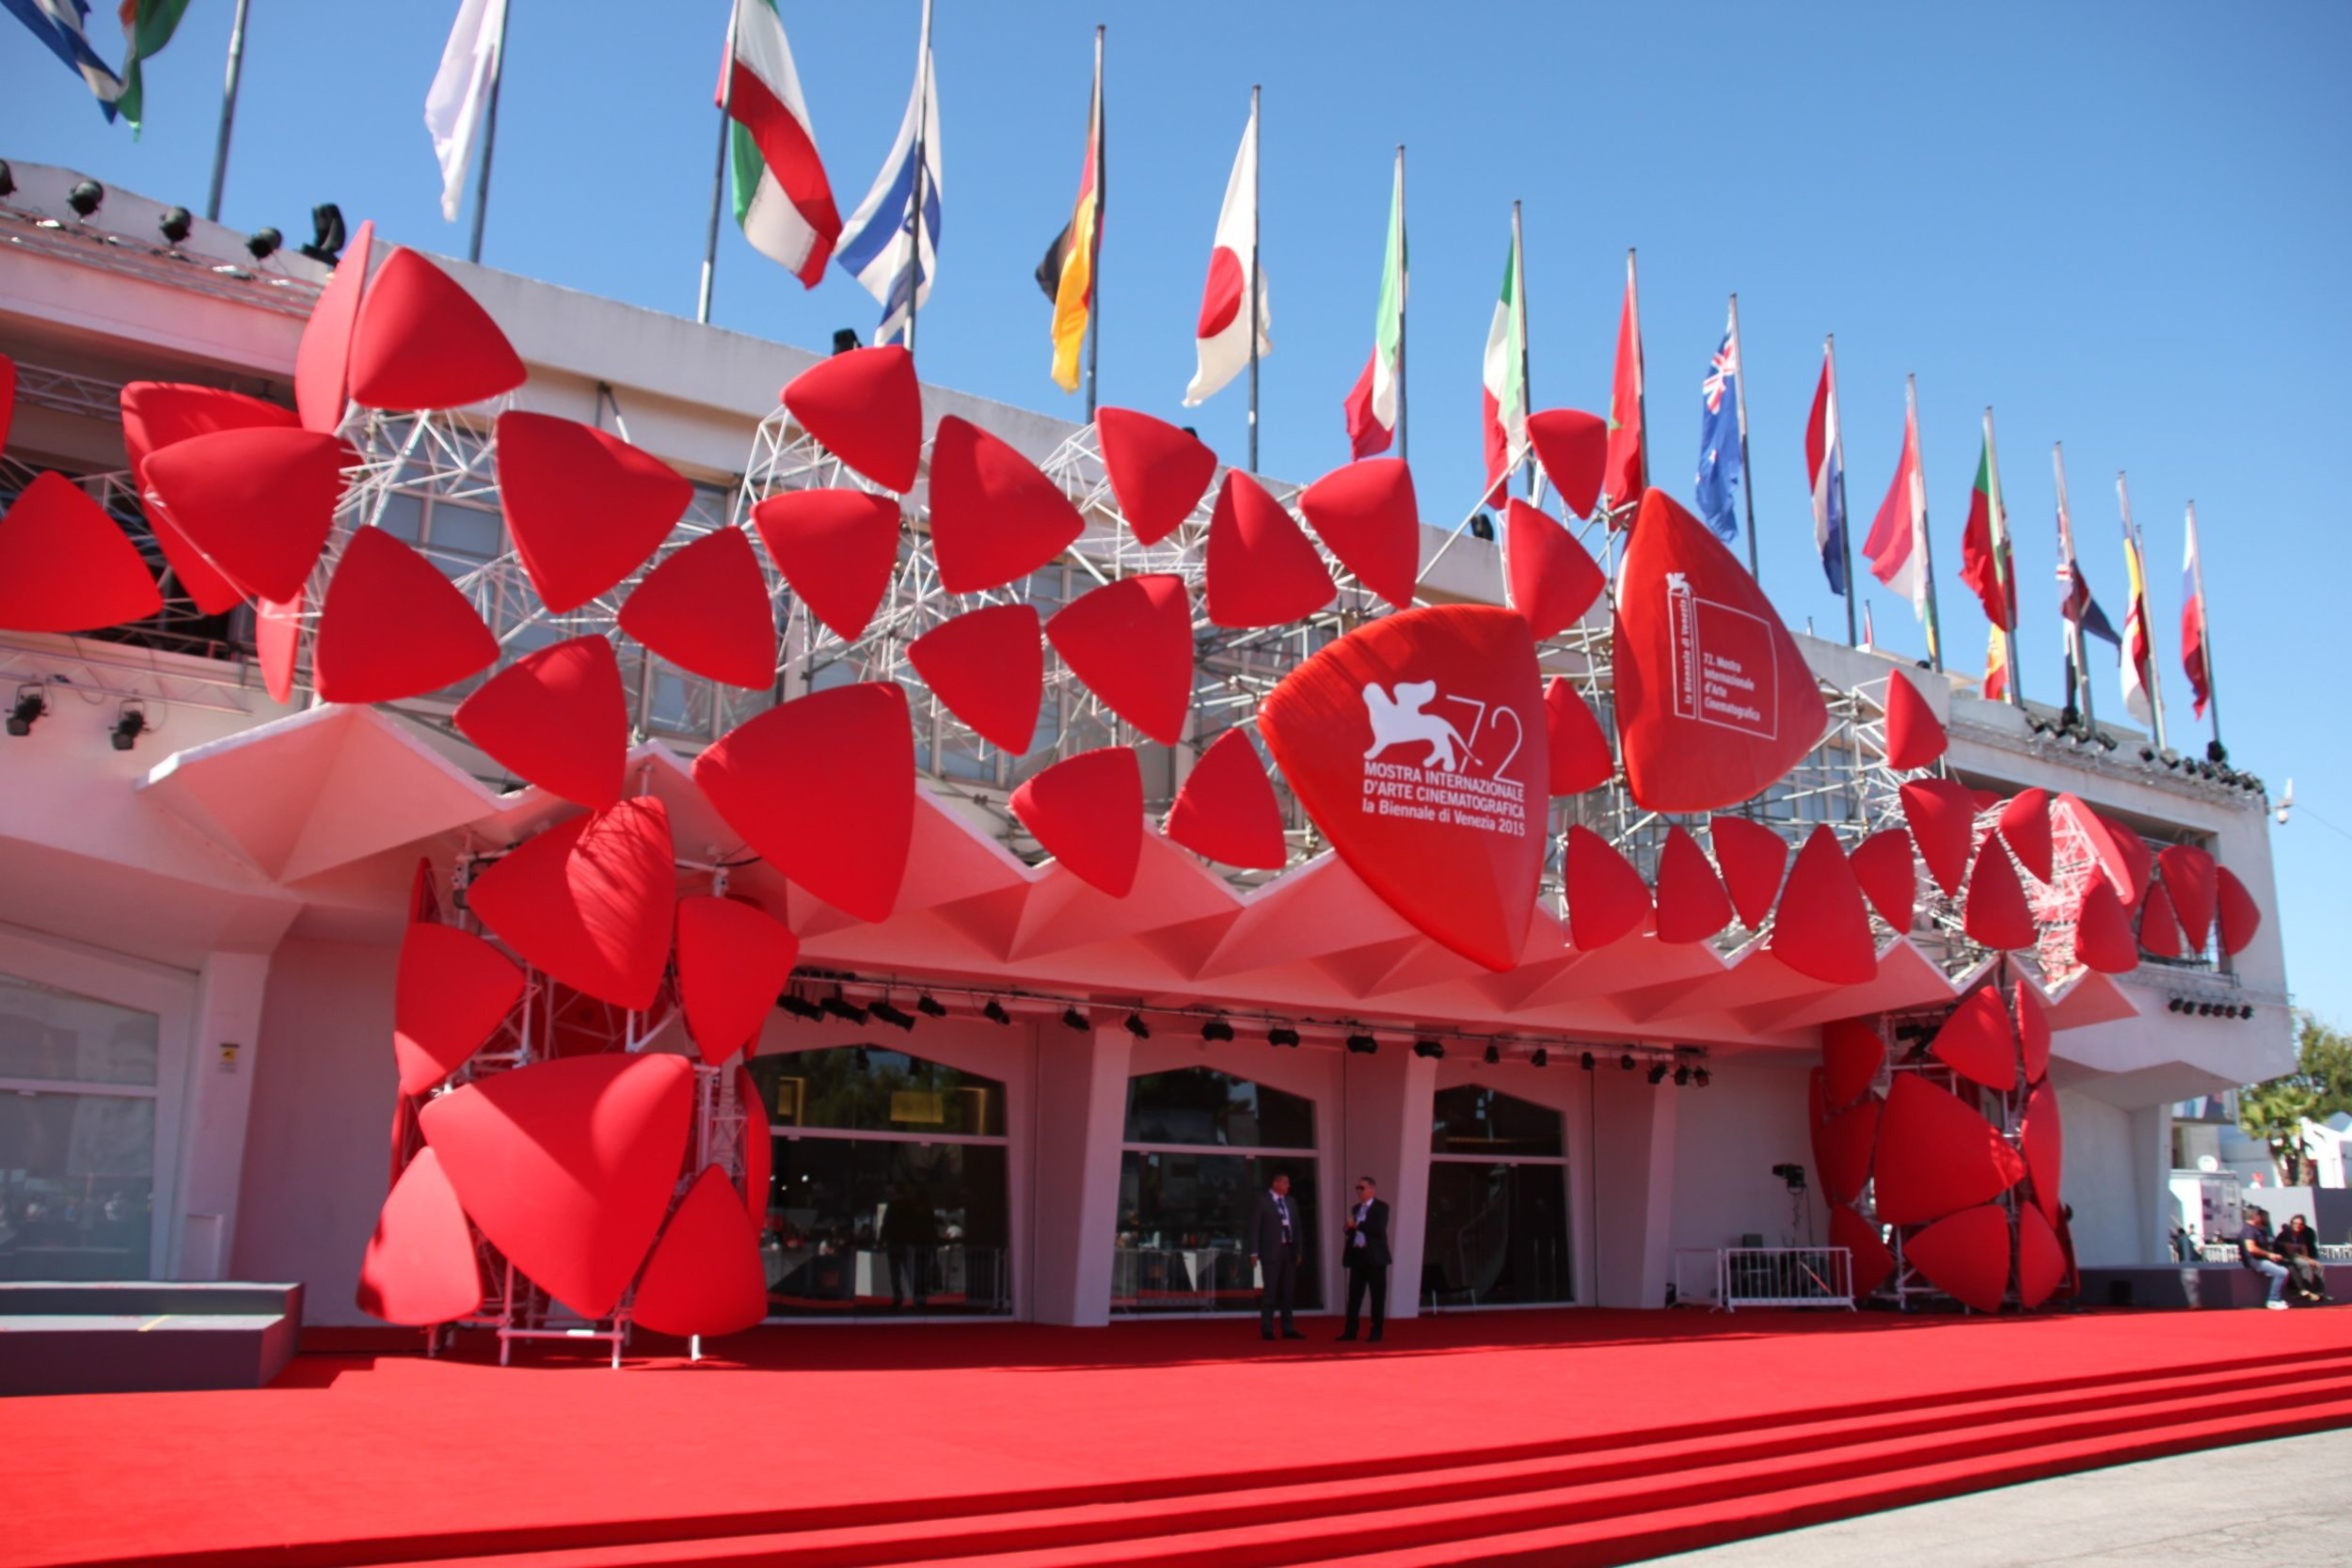 <p>Speaking of the Lido, when the Venice Film Festival hits town every September, there's no better place to be. Pro tip: get to screenings early. Even if you have a pass, you'll need to be there a couple of hours before the film starts. </p><p>You may also like: <a href='https://www.yardbarker.com/lifestyle/articles/out_cold_20_foods_you_shouldnt_refrigerate_022624/s1__34562840'>Out cold: 20 foods you shouldn't refrigerate</a></p>